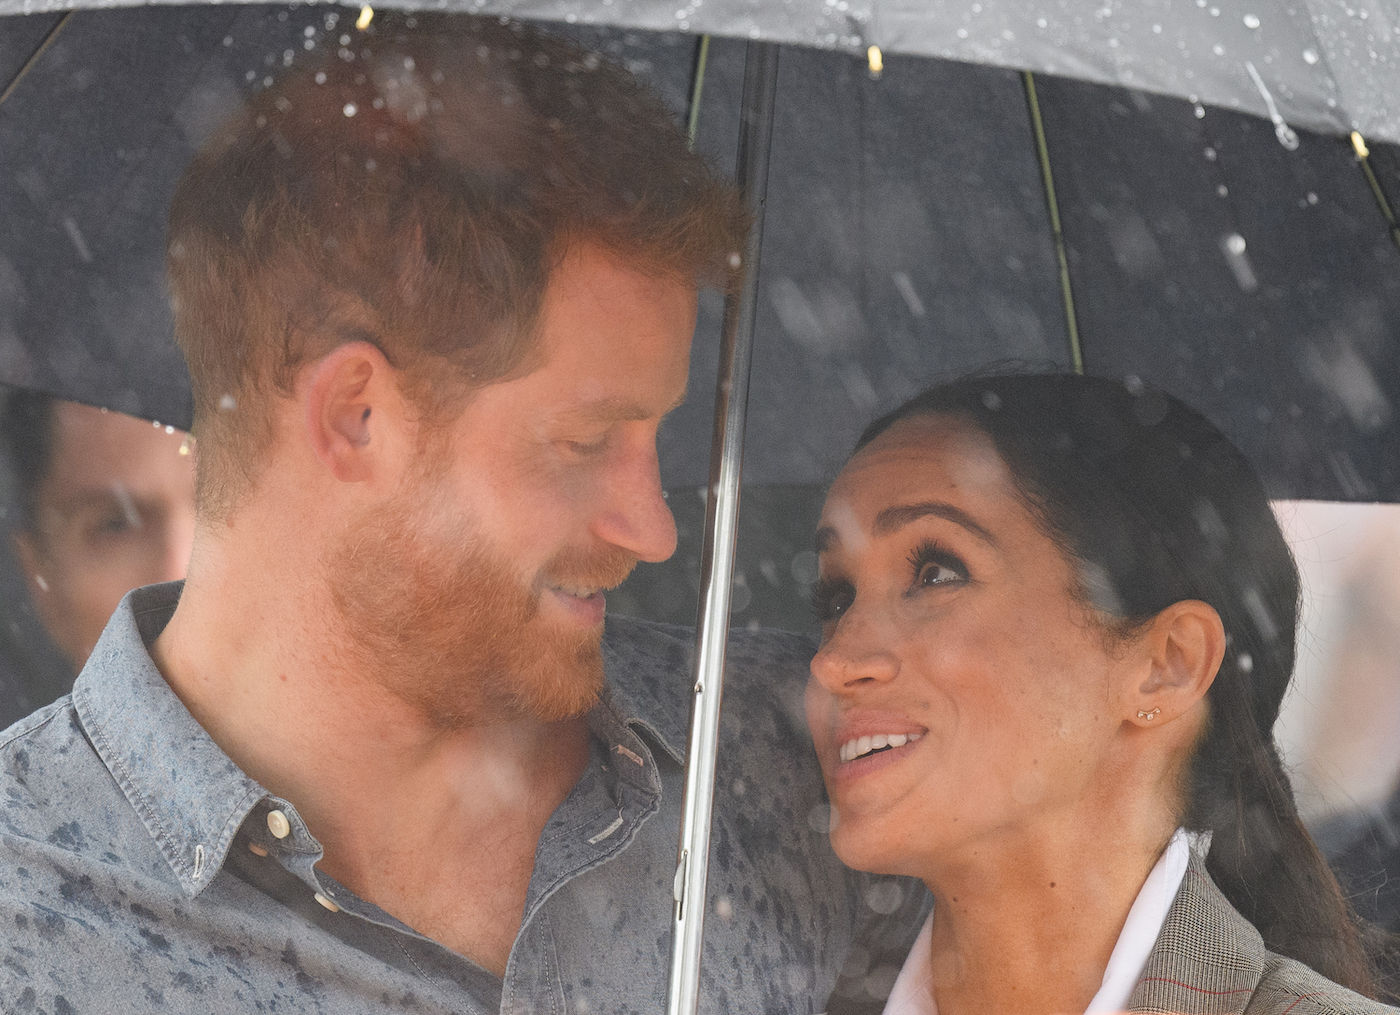 Prince Harry and Meghan Markle stand under an umbrella during a visit to Dubbo, Australia